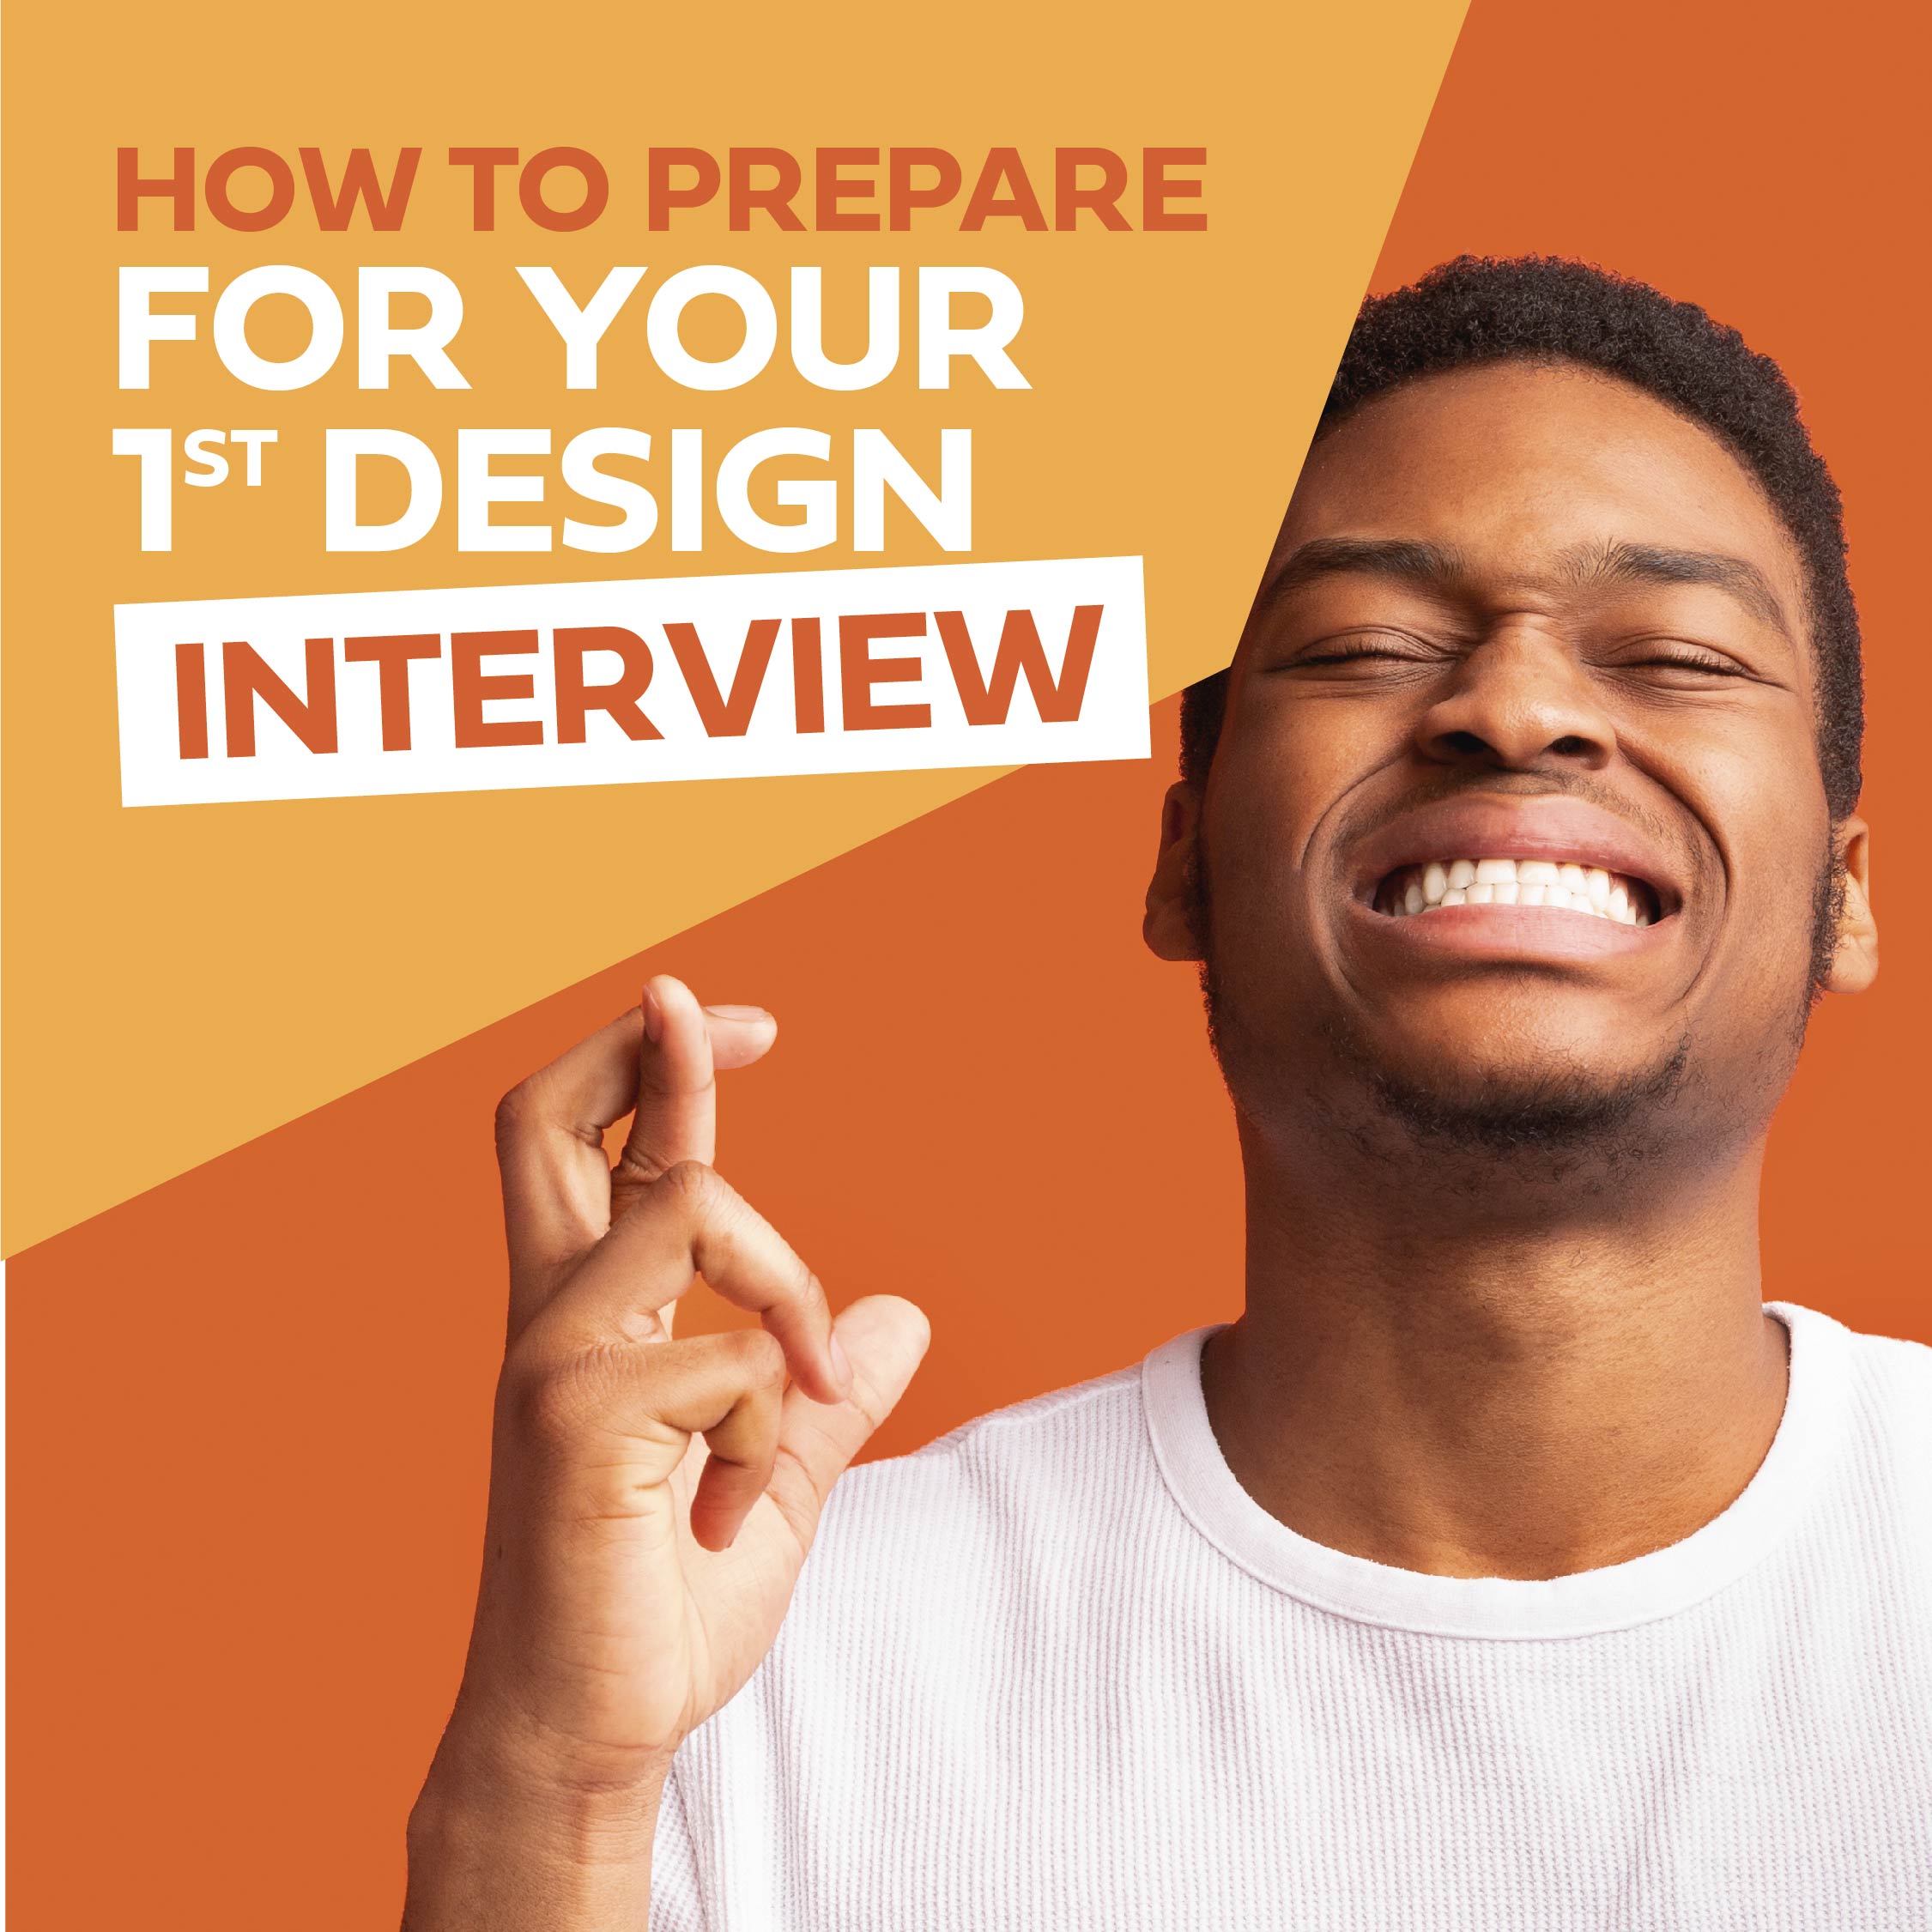 How to prepare for your first design interview